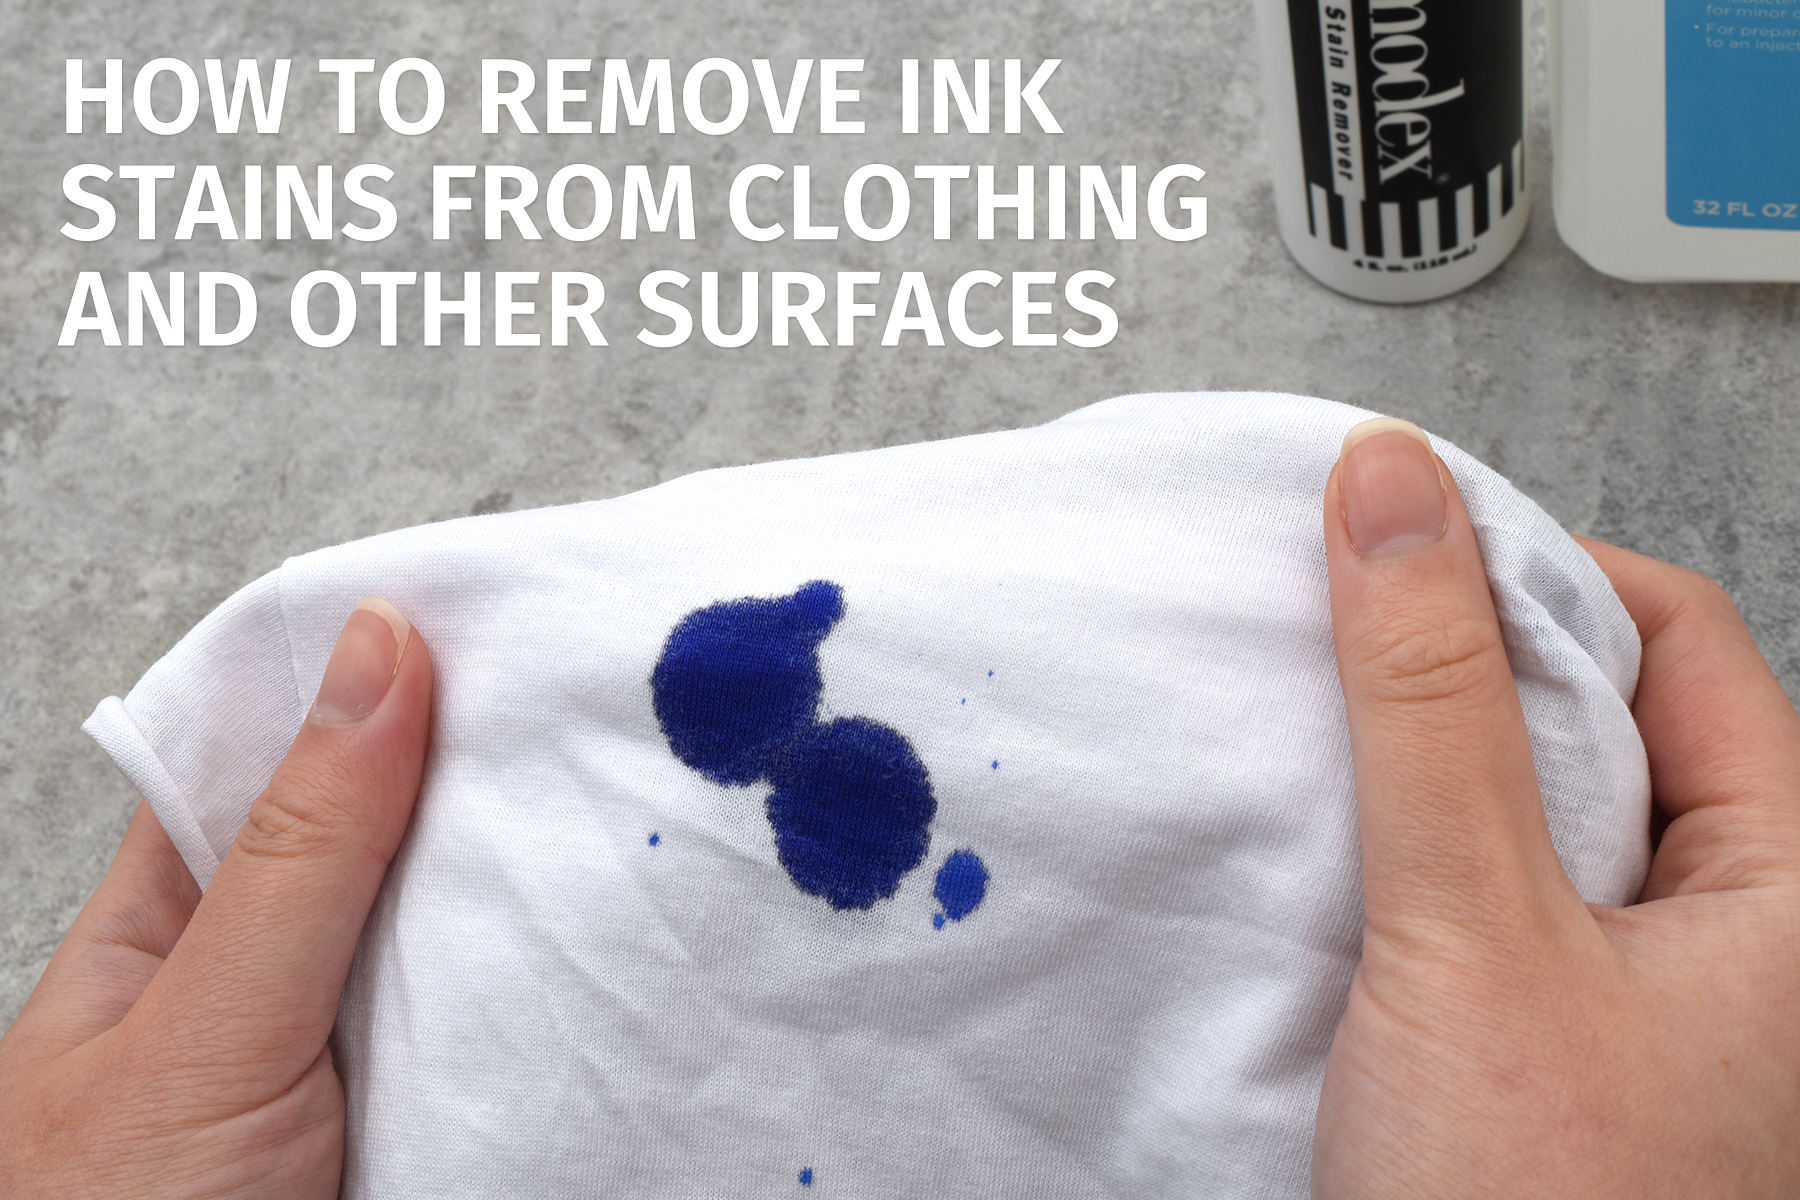 How to Remove Ink Stains from Clothing and Other Surfaces | JetPens